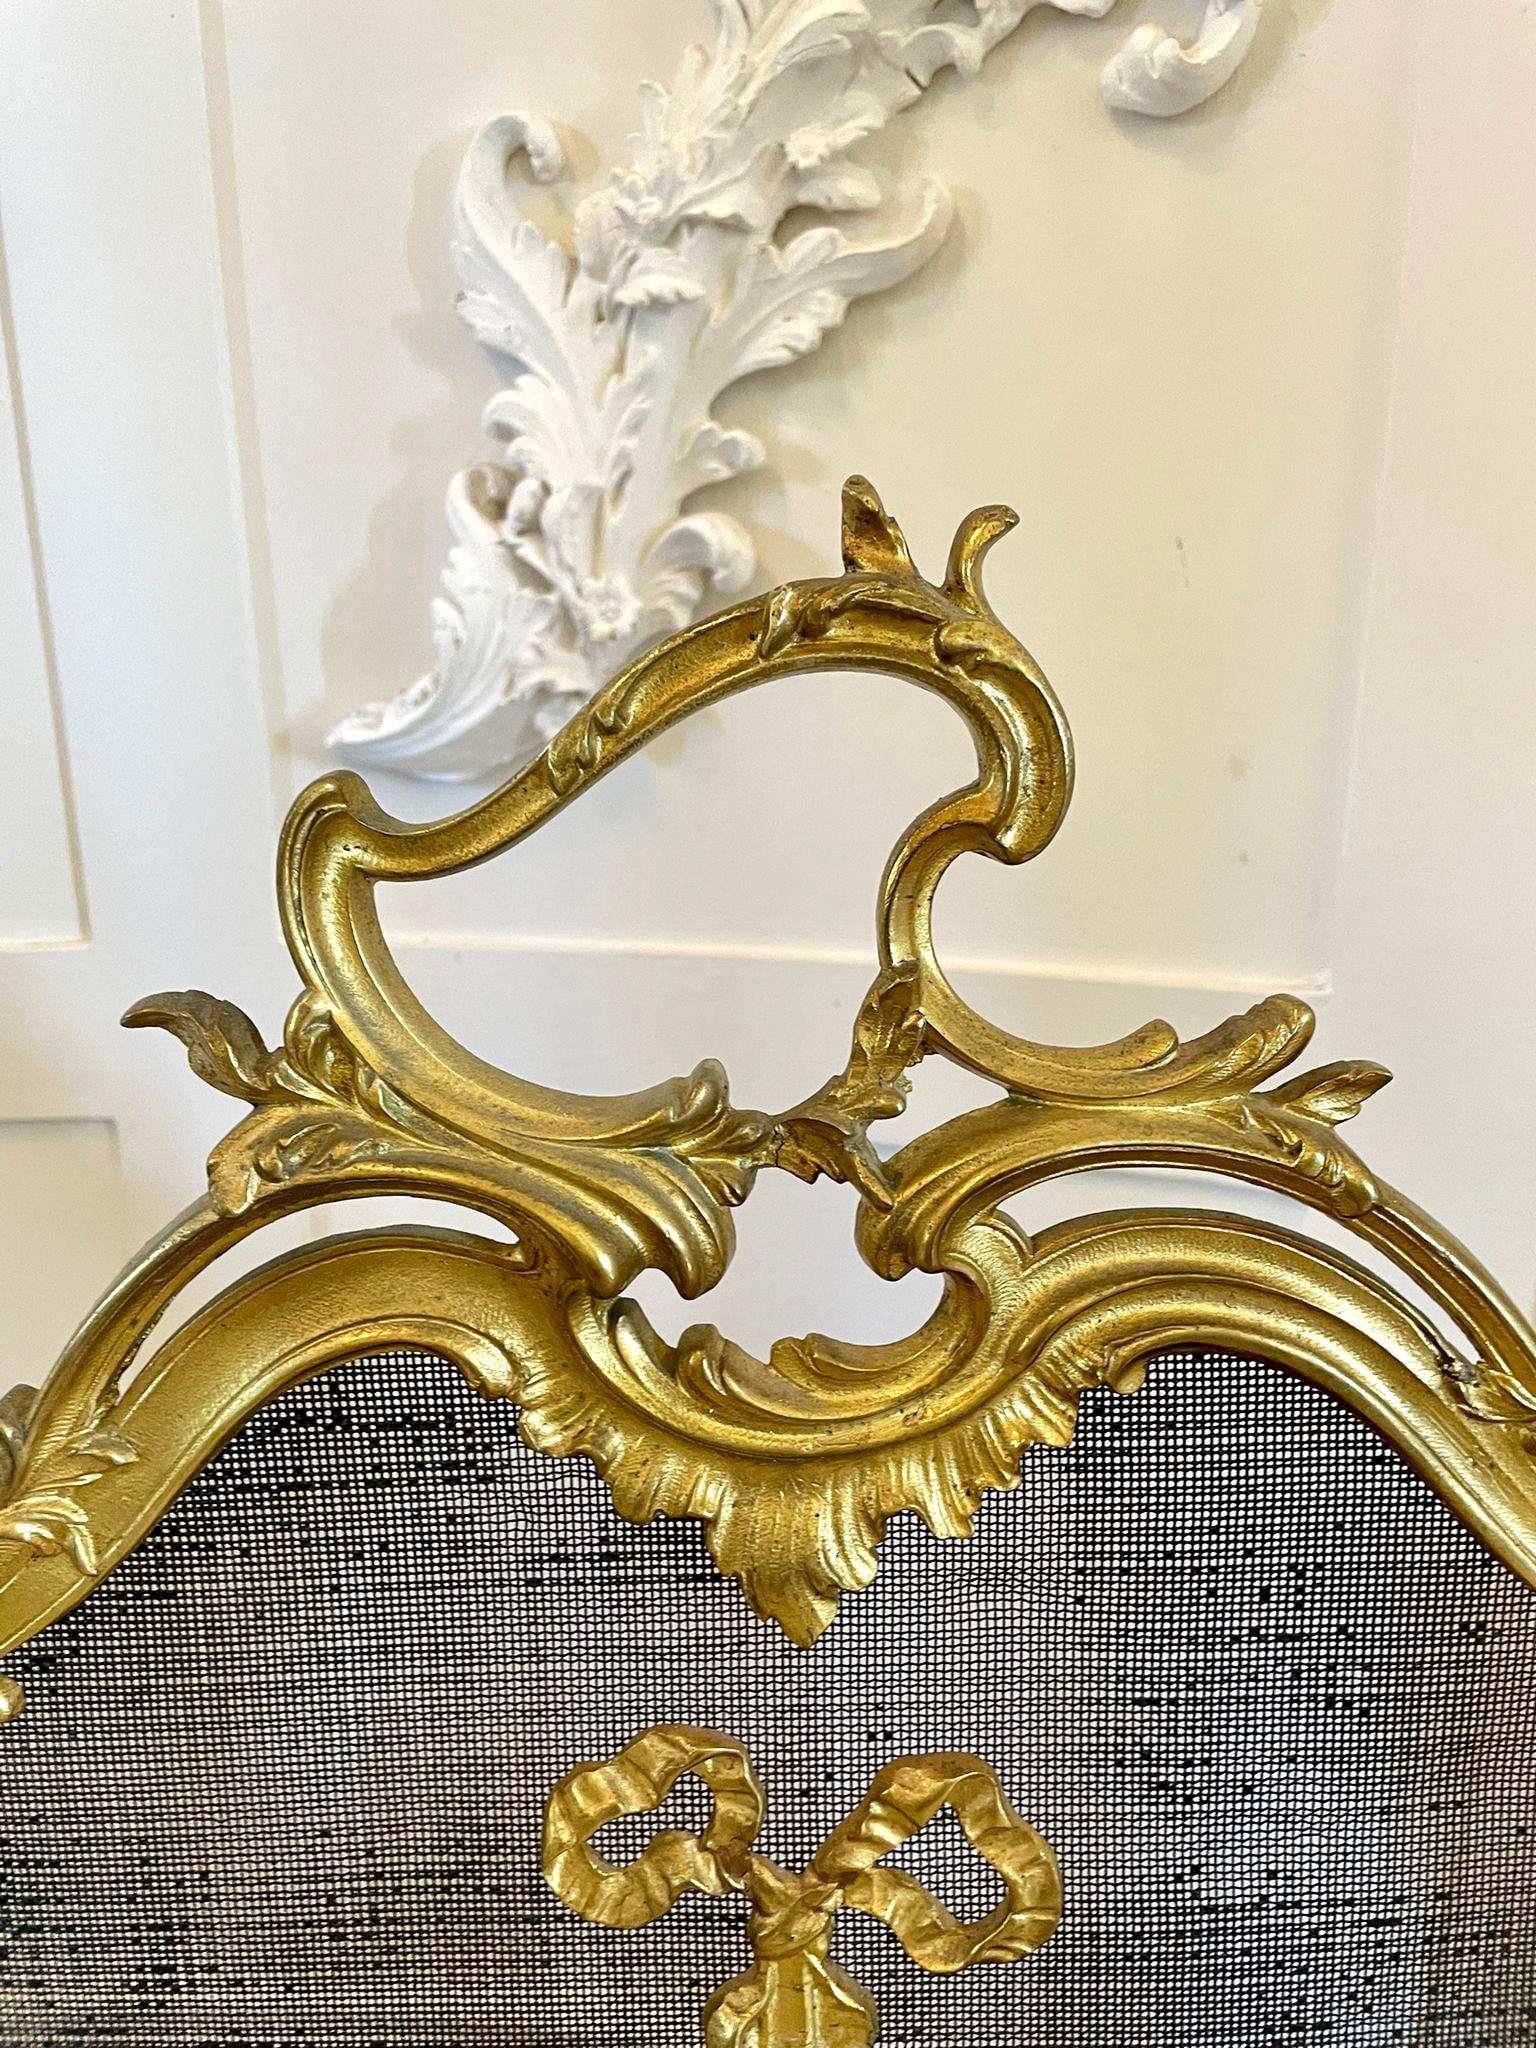 Outstanding Quality French 19th Century Ornate Gilt Ormolu Fire Screen 3